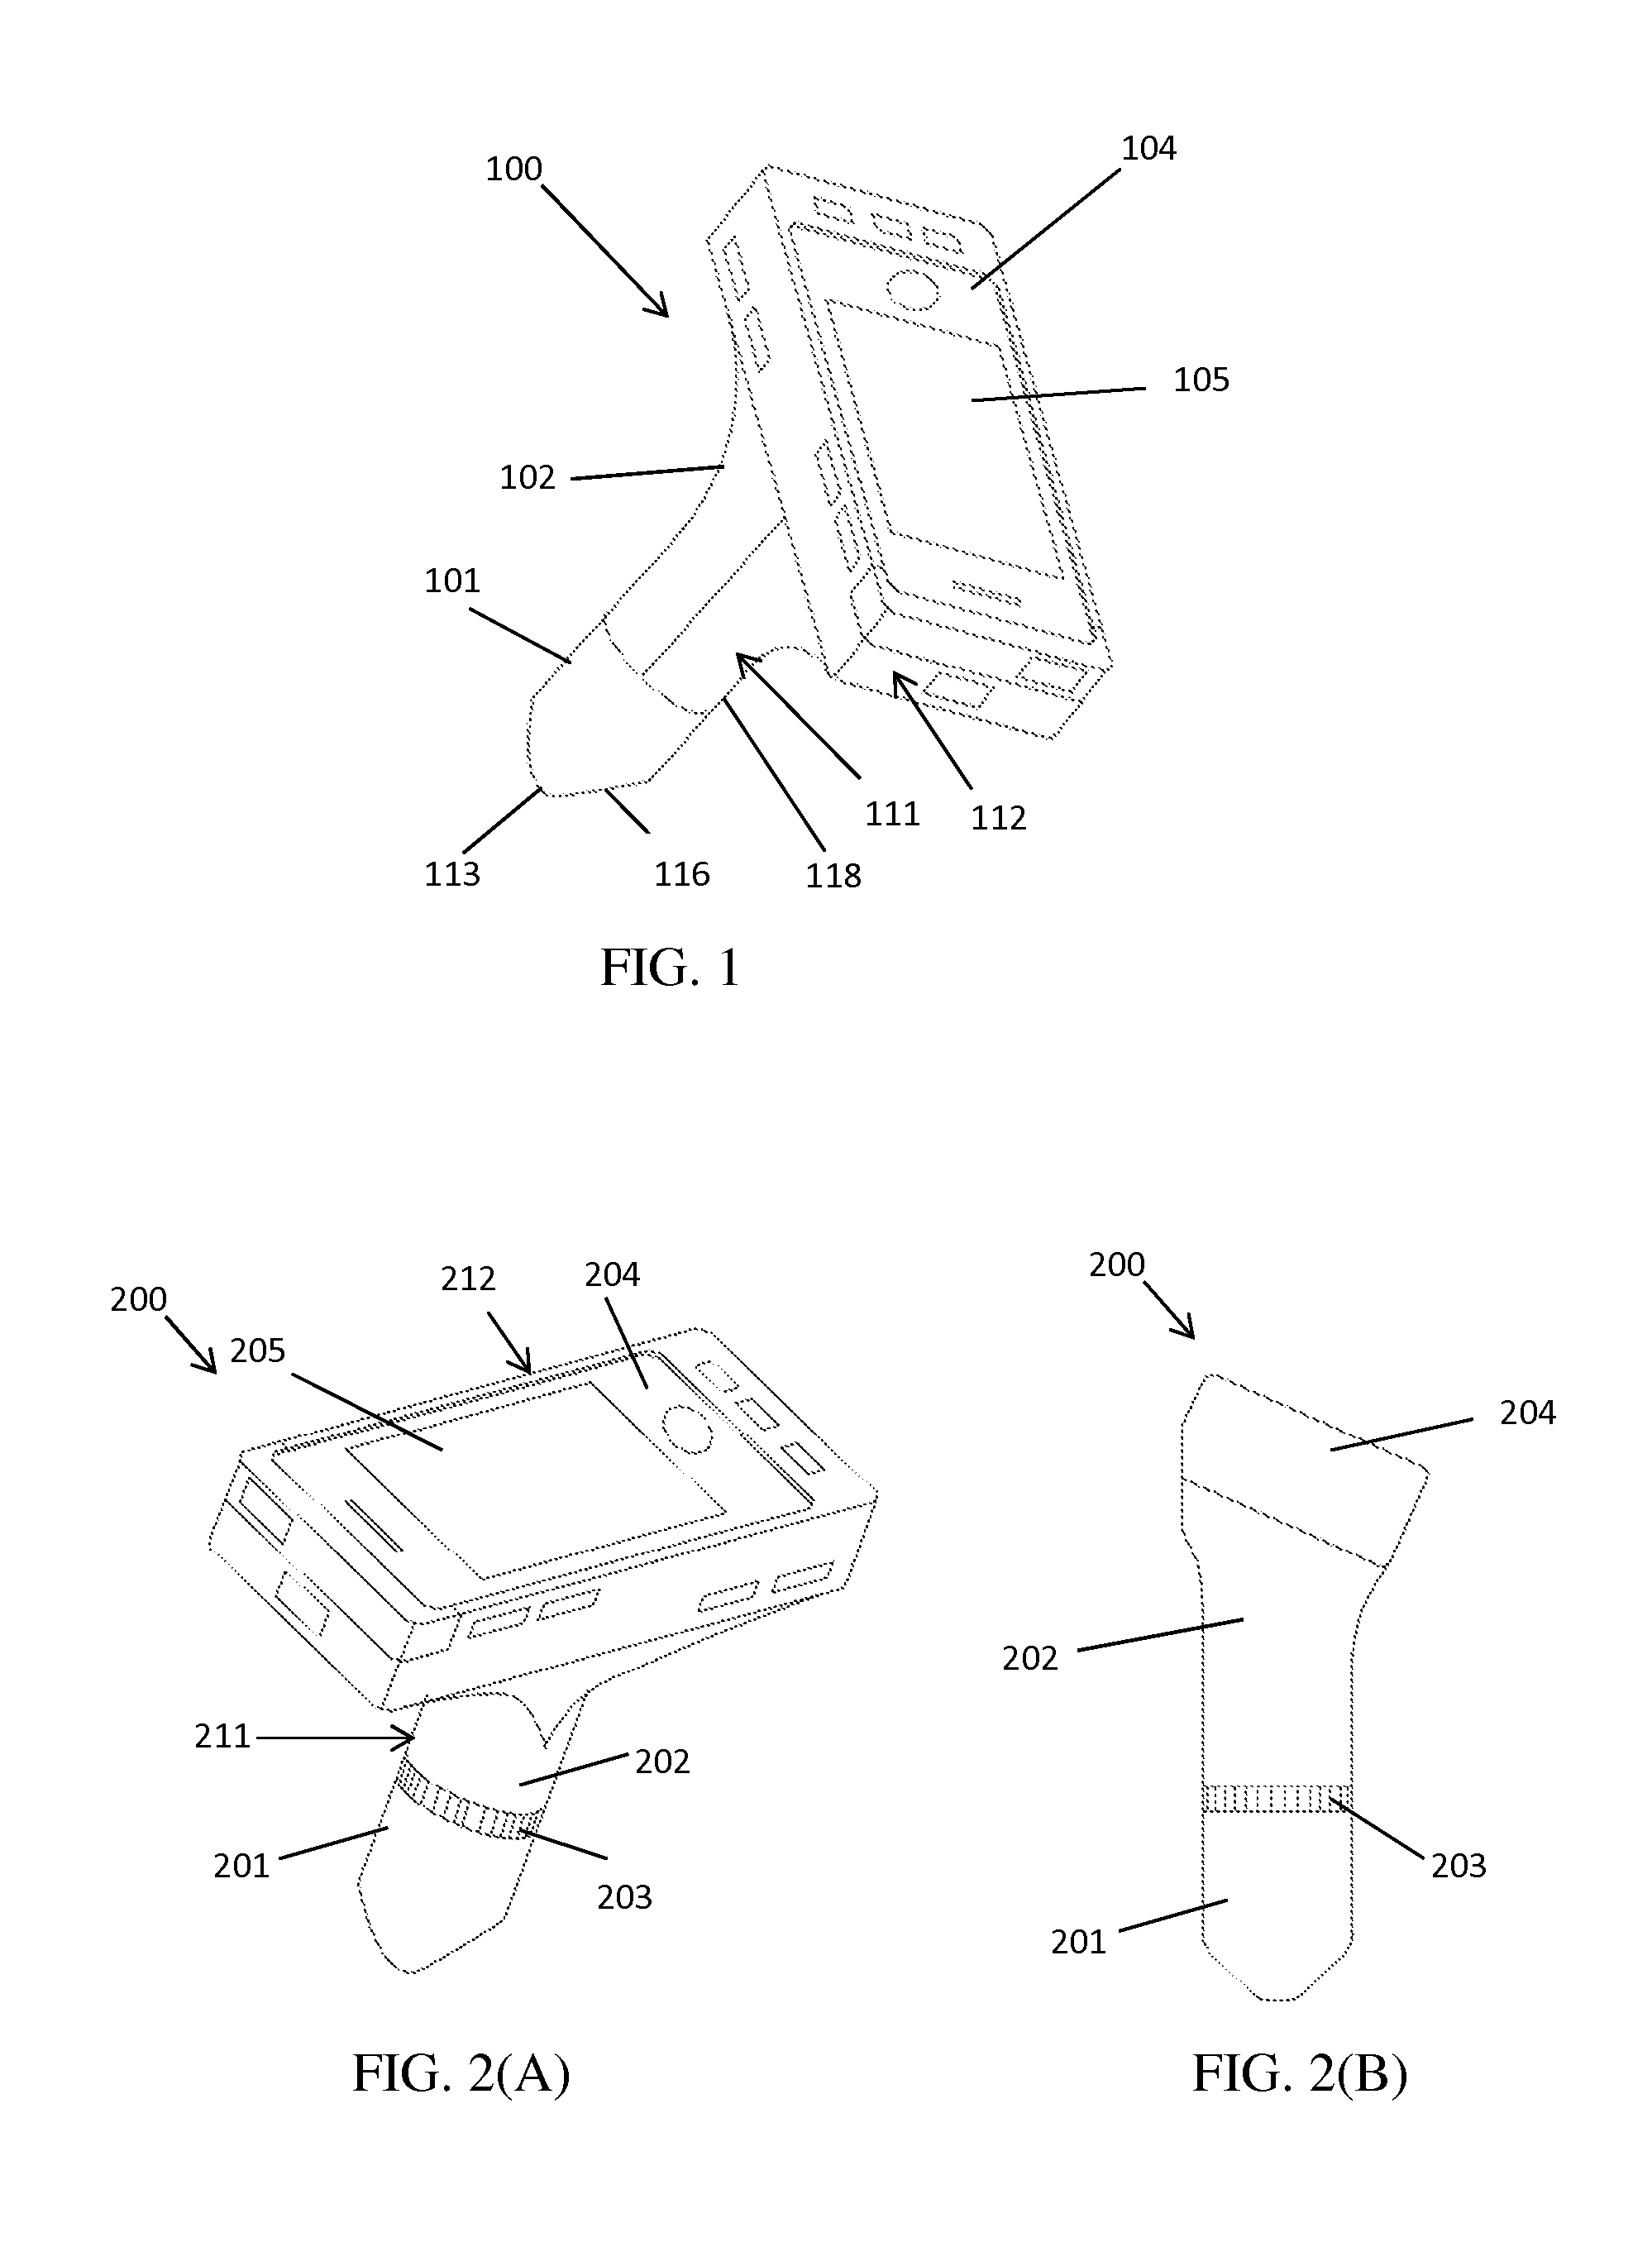 Eye imaging apparatus and systems